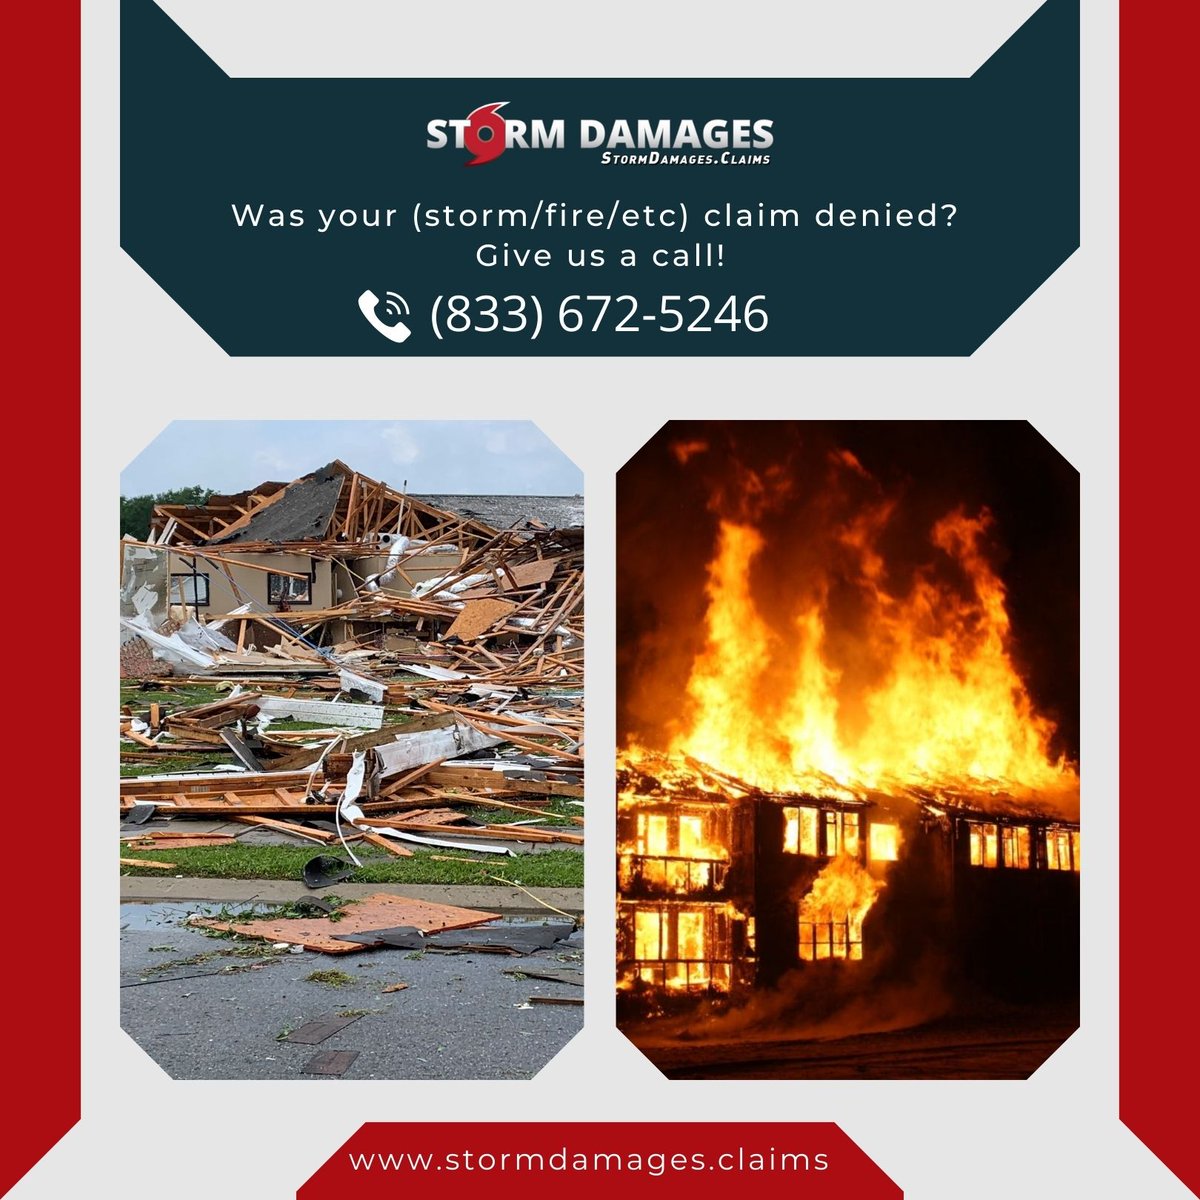 Was your (storm/fire/etc) claim denied? Give us a call! ☎️ (833) 672-5246👈 #insurance #Insuranceclaims #FireDamage #FloodDamage #WaterDamage #WindDamage #stormdamages #tornadoes #floods #hurricanes #InsuranceCompany #commercialinsurance #insuranceloss #securetheproperty